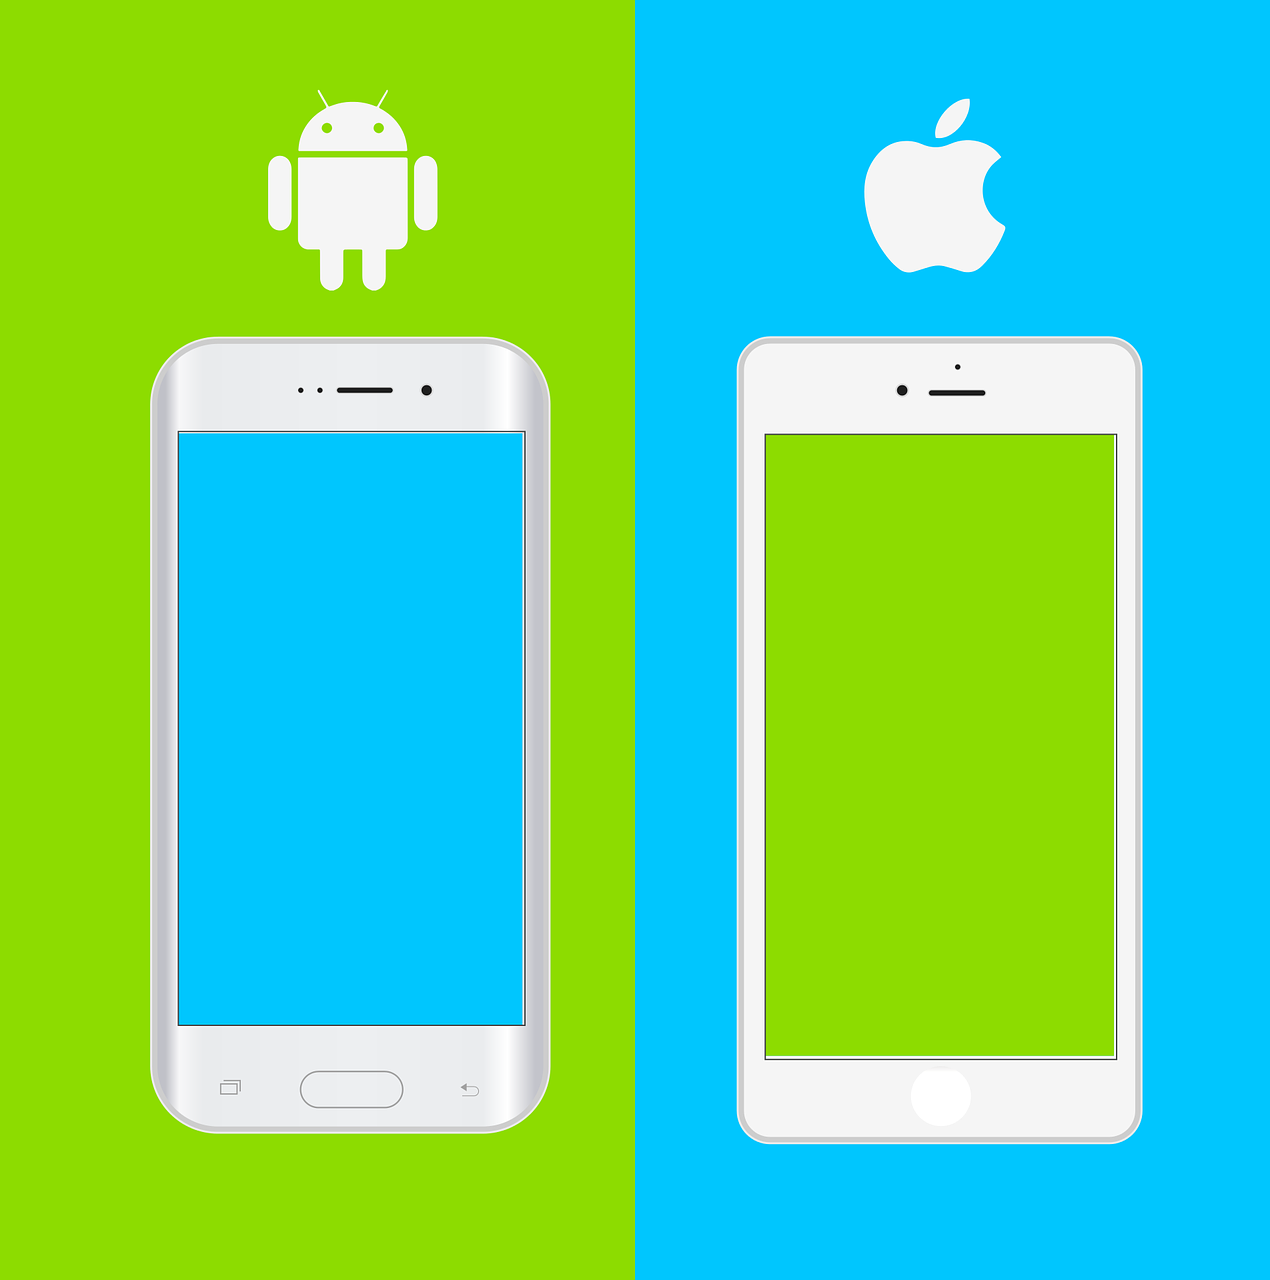 iOS / Android